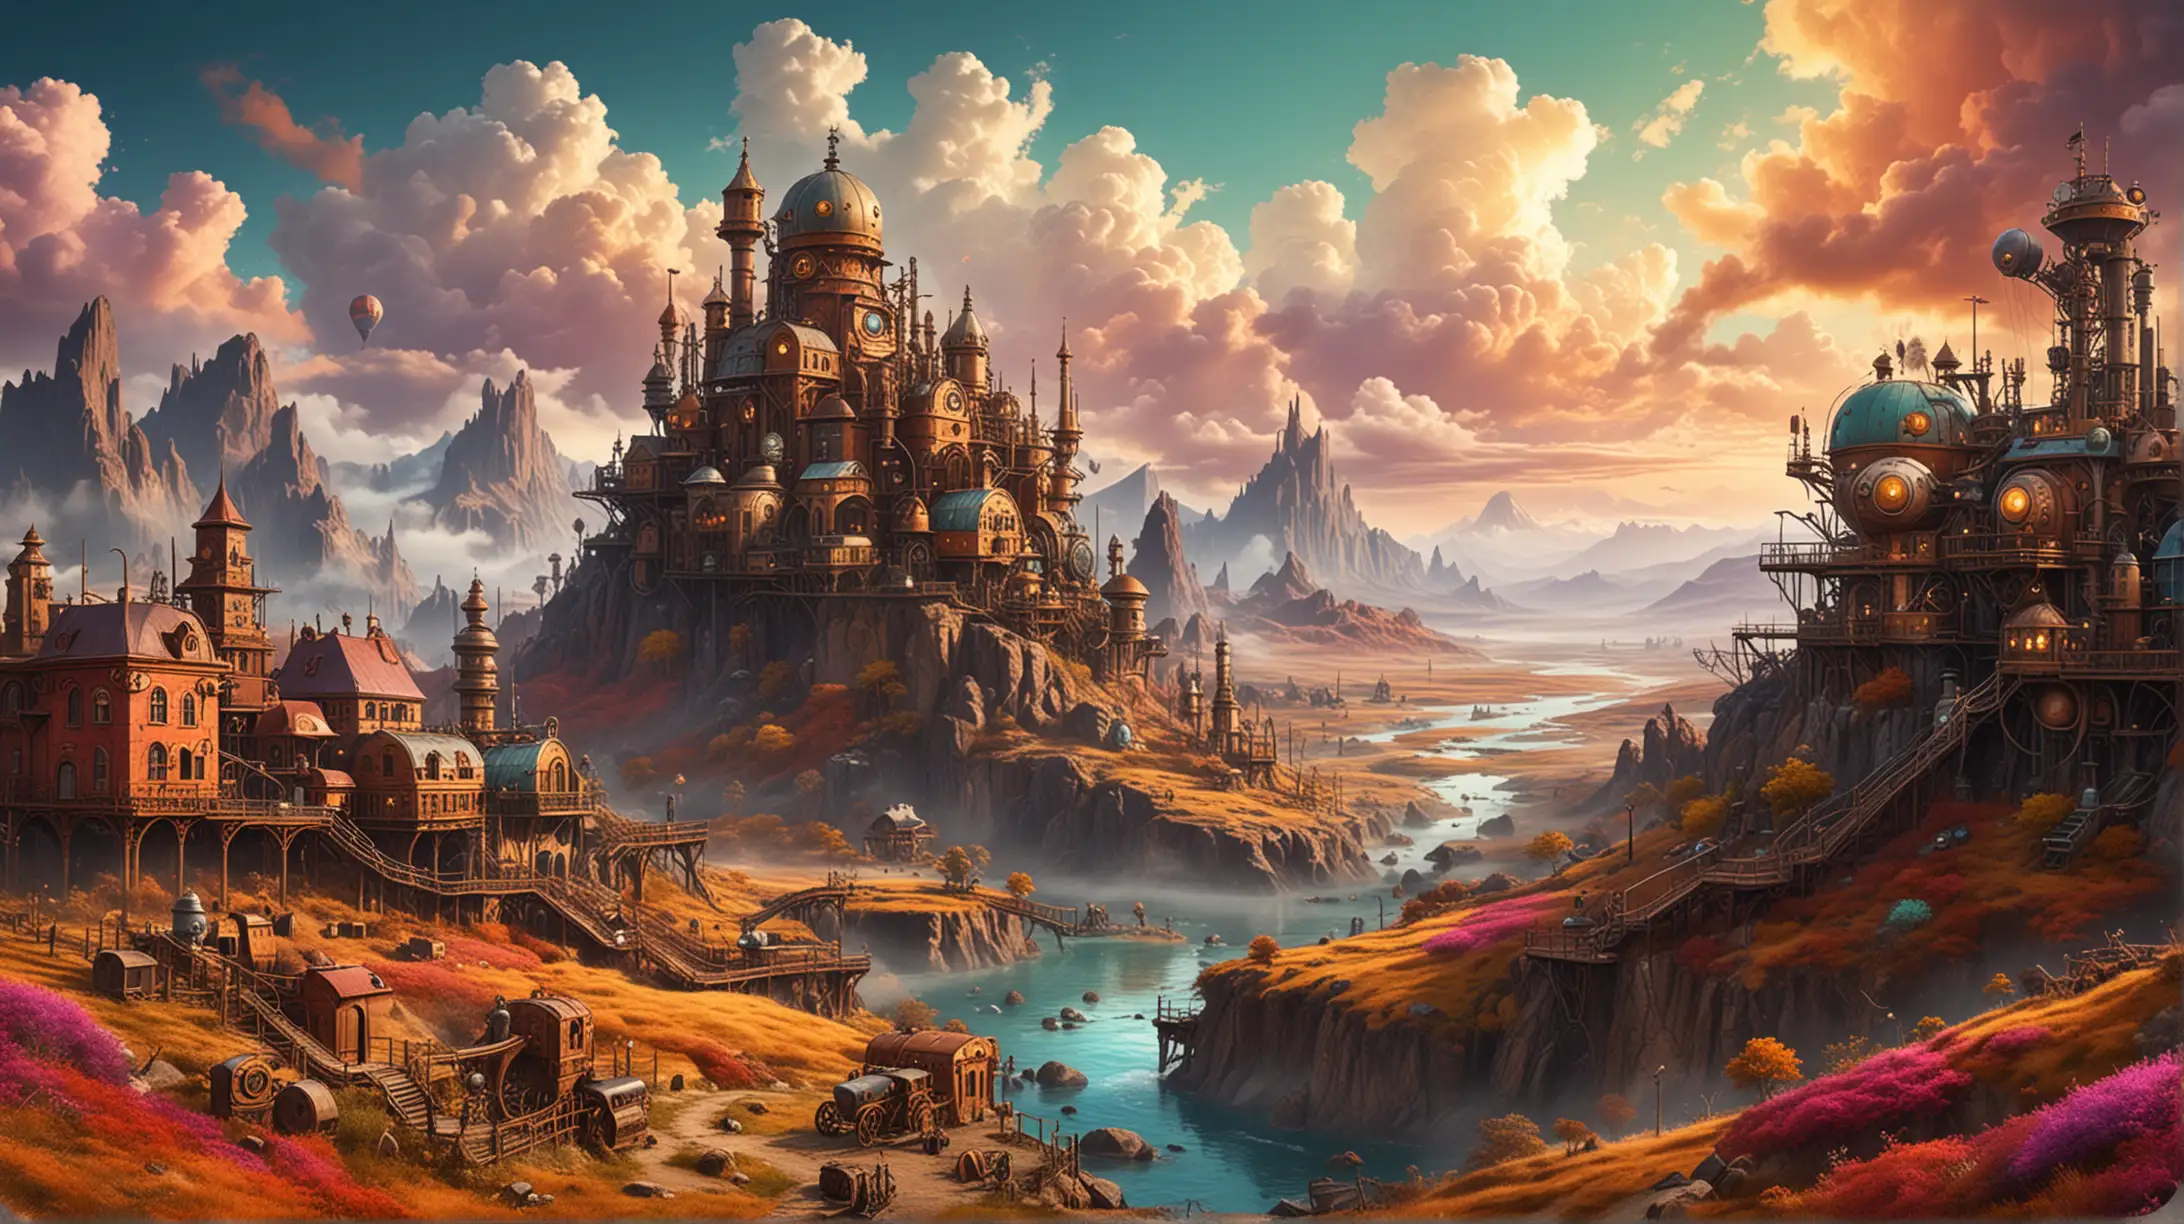 Vibrant Steampunk Landscape with Funky Colors